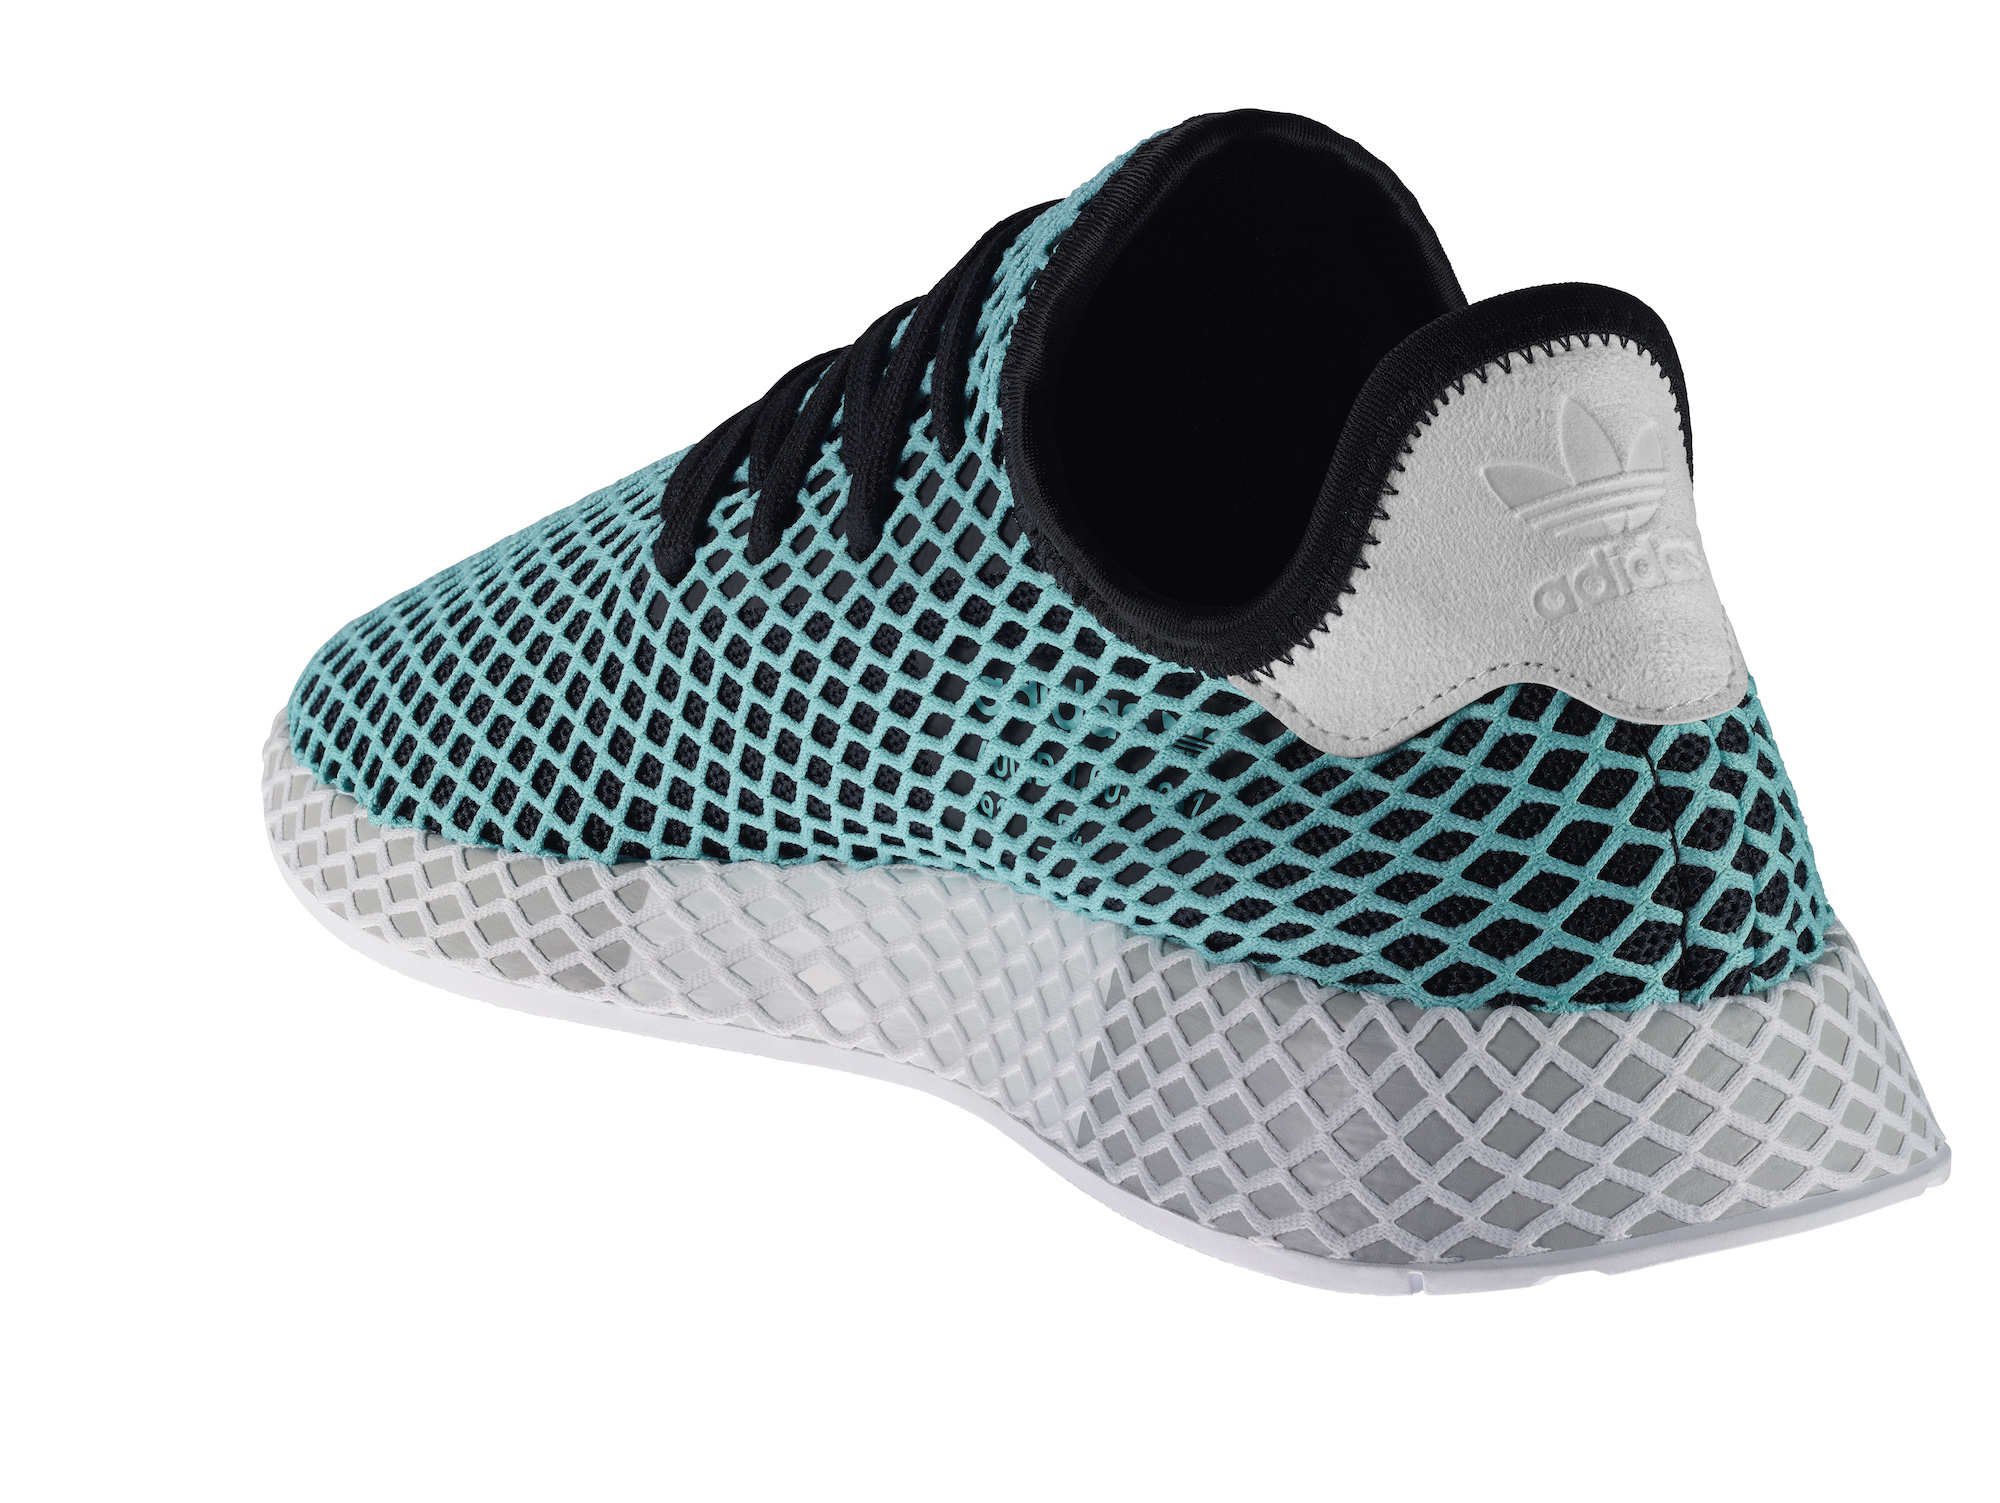 adidas Originals and Parley for the 